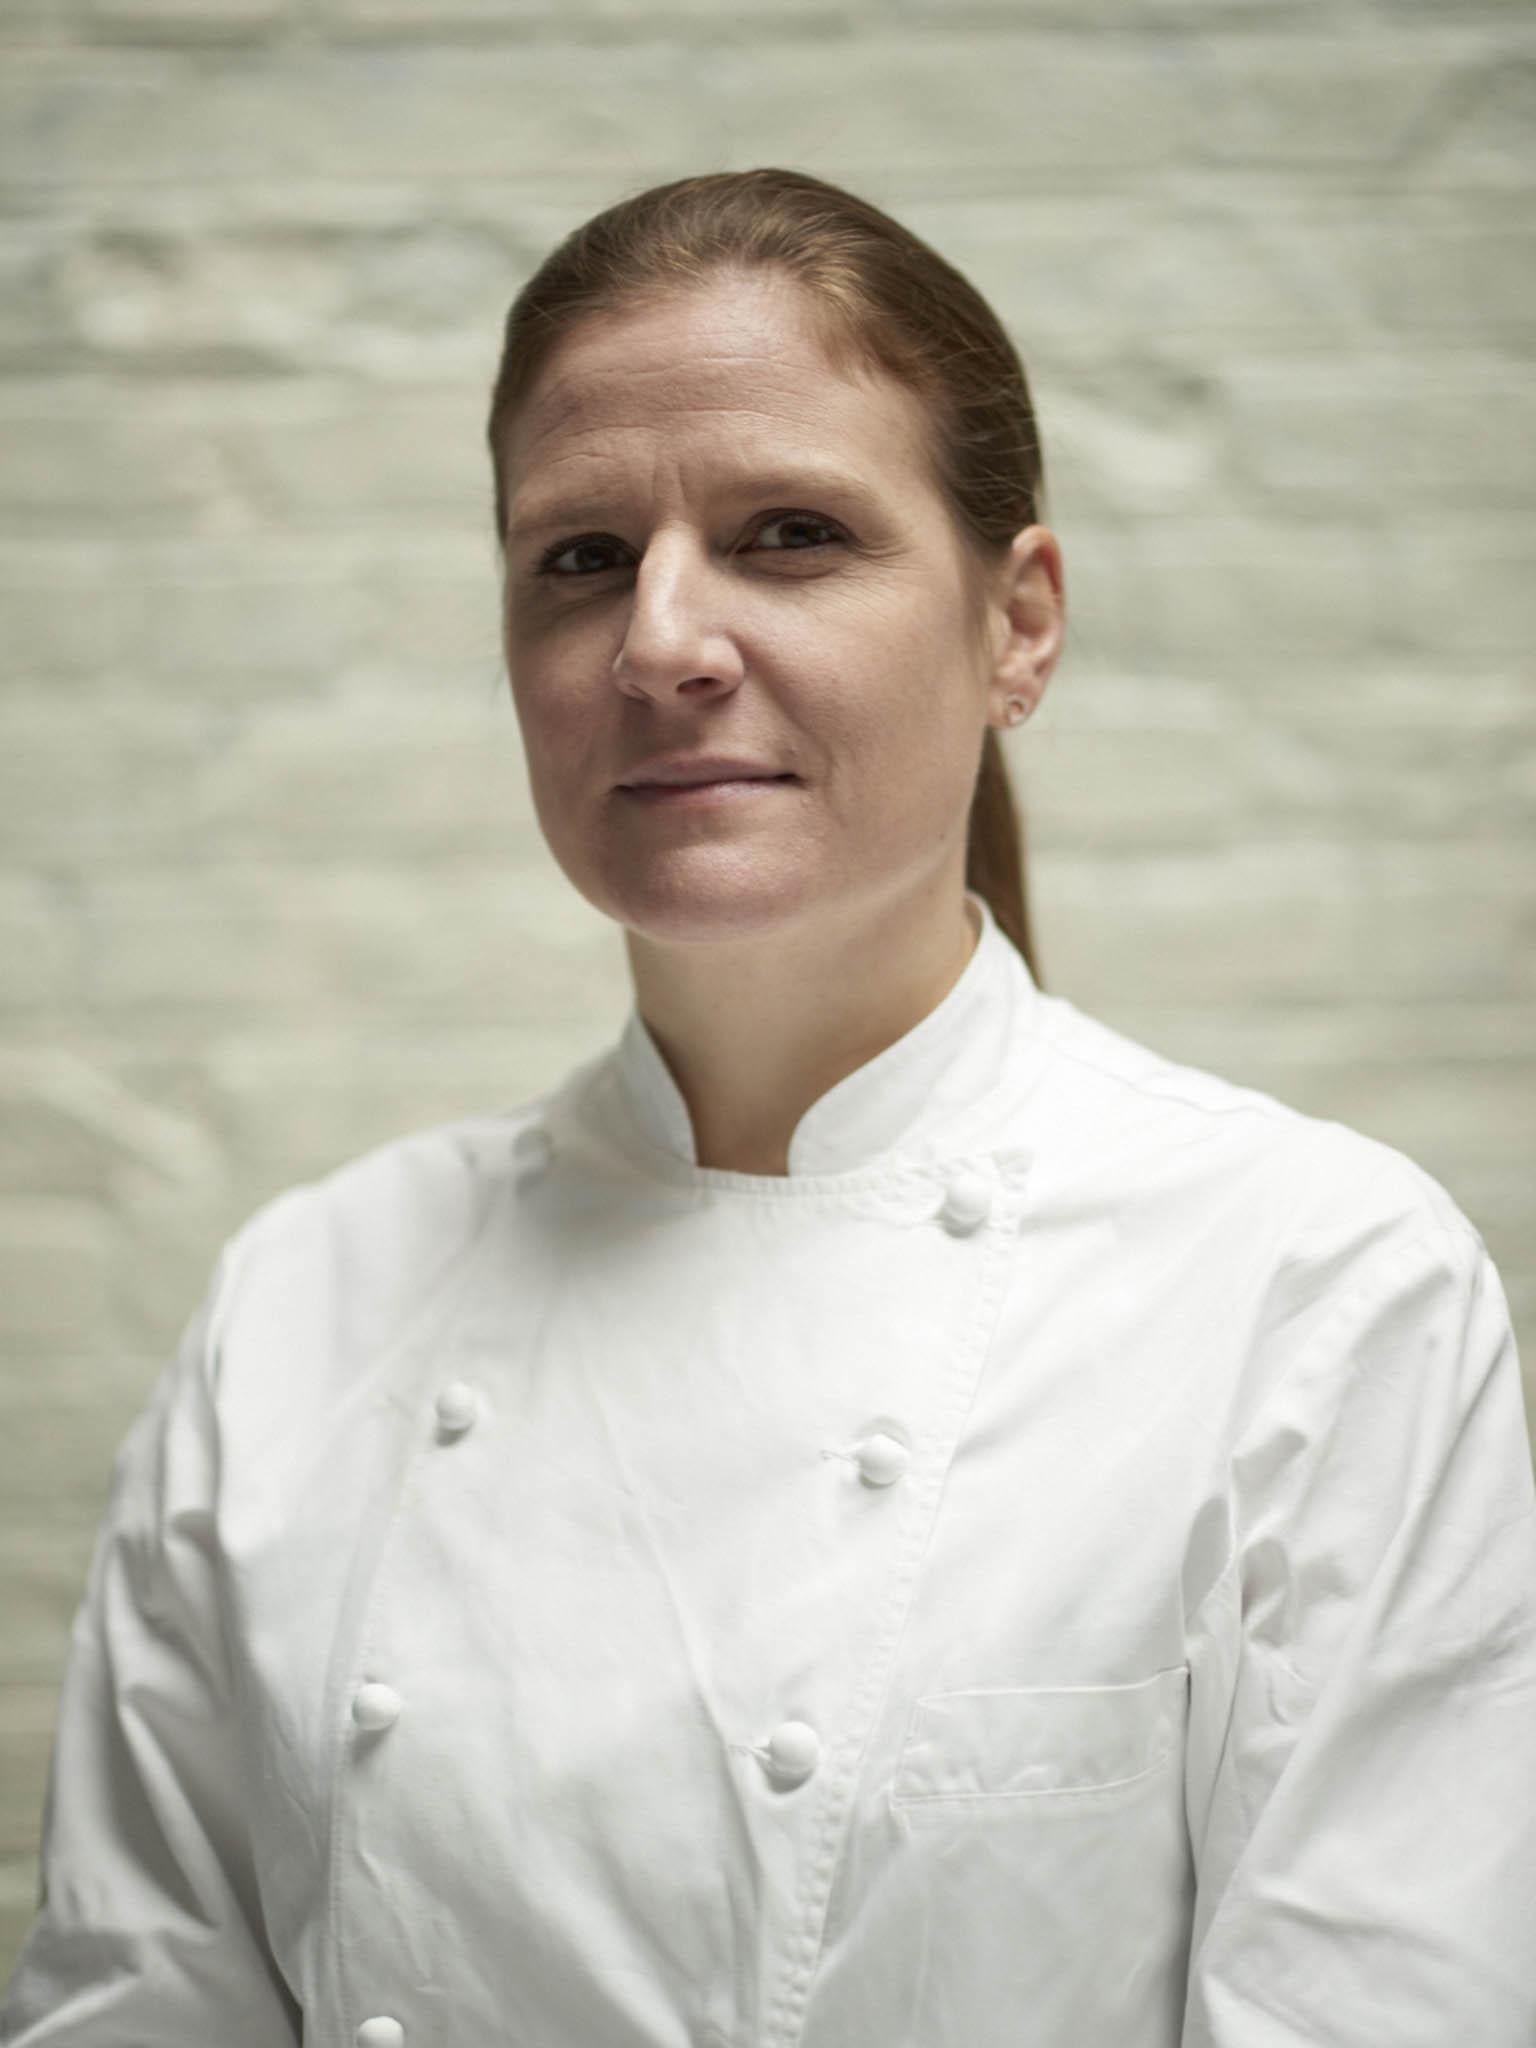 A career change for Chantelle Nicholson now sees her championing a plant-based tasting menu at Tredwells, Seven Dials